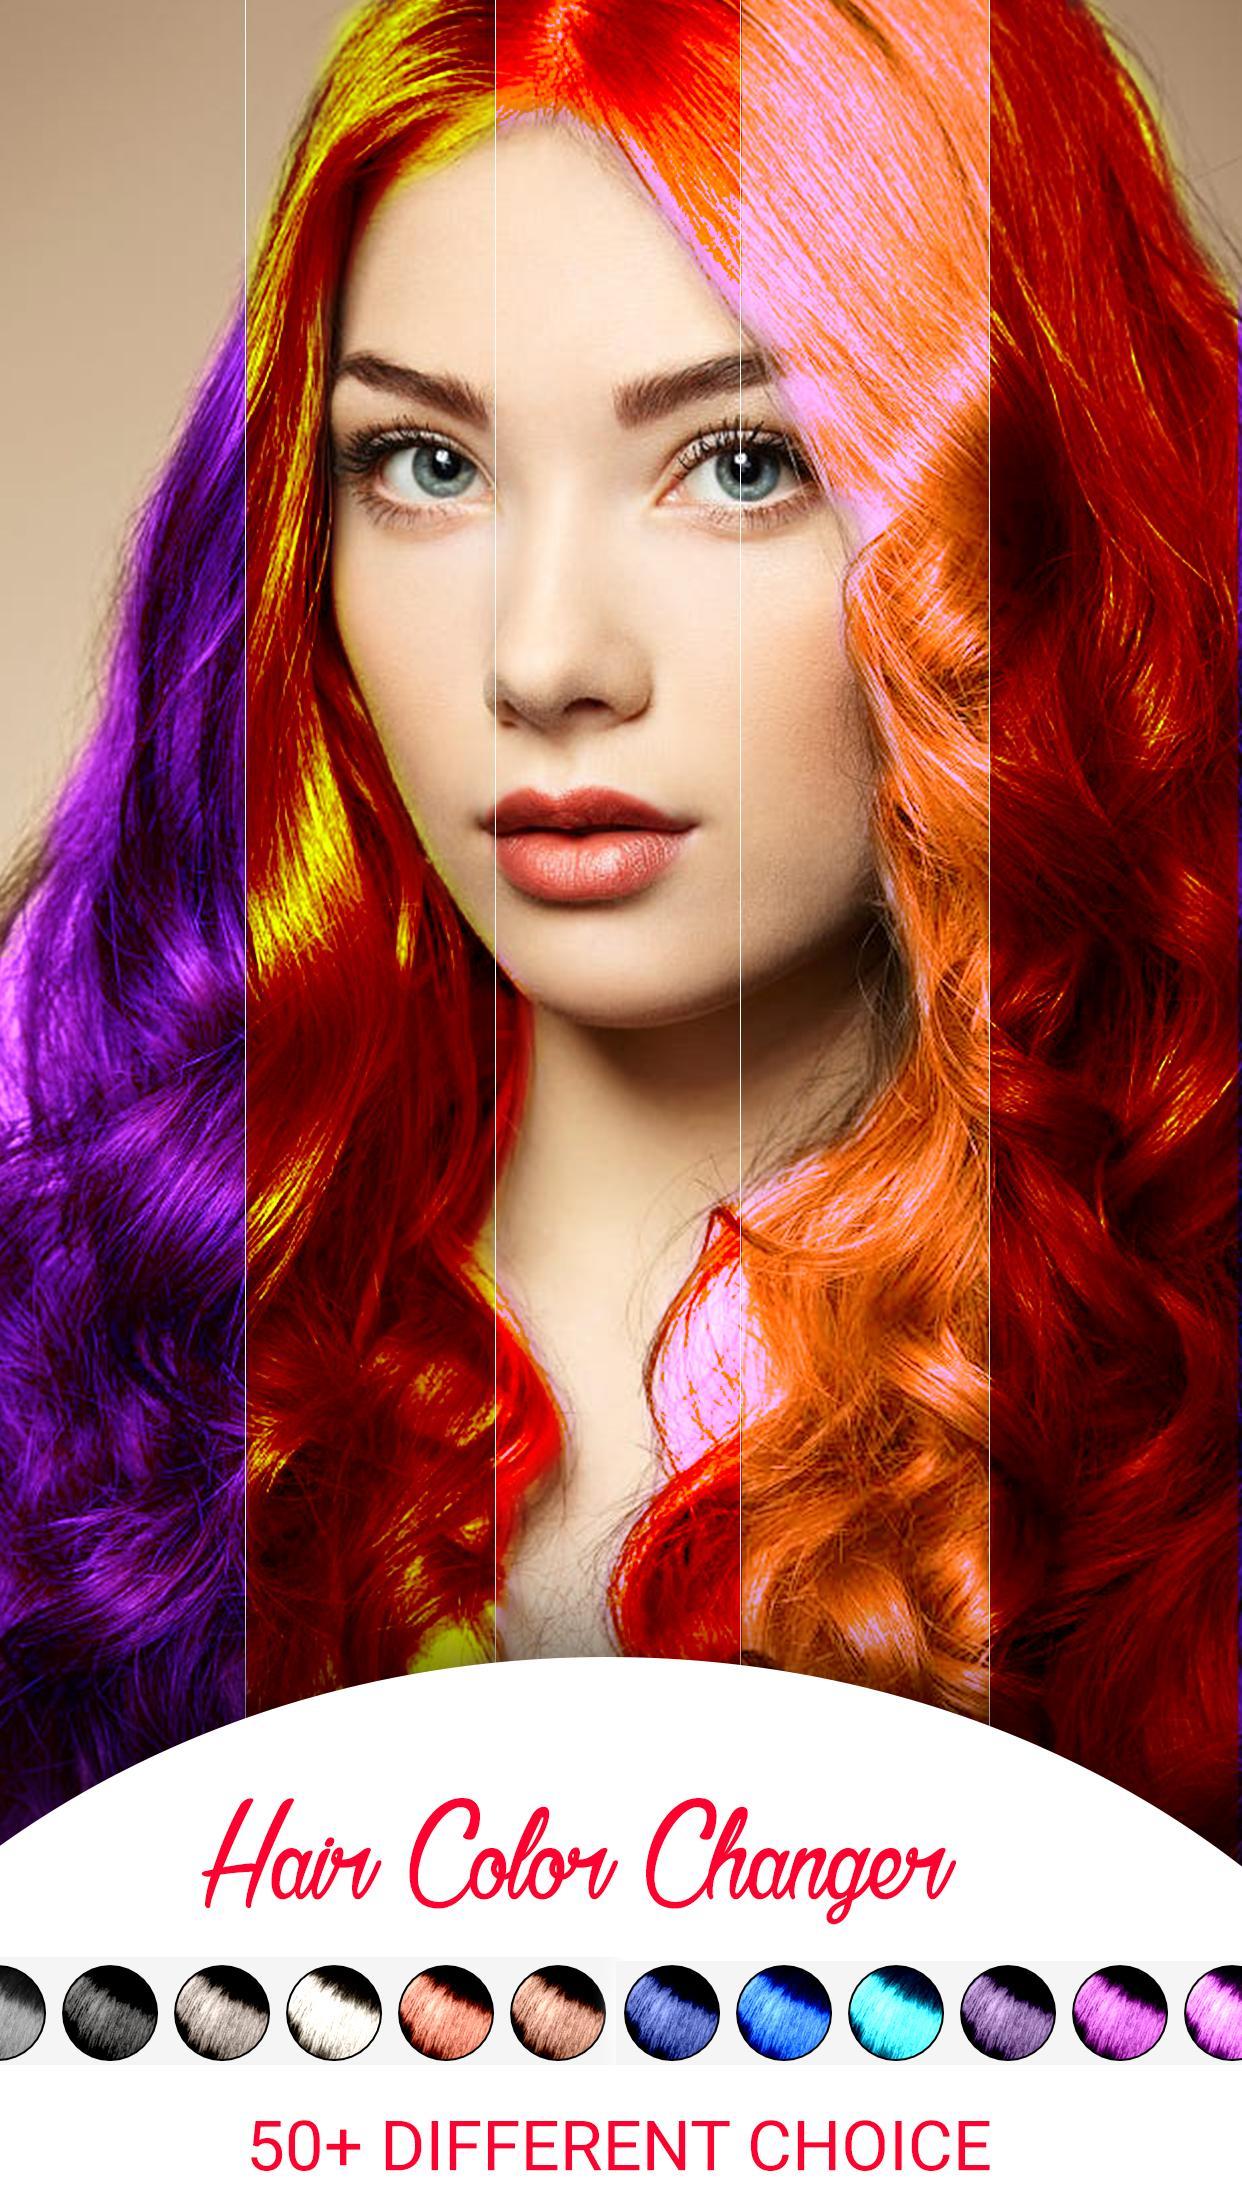 Hair Color Change Photo Editor APK Android Download